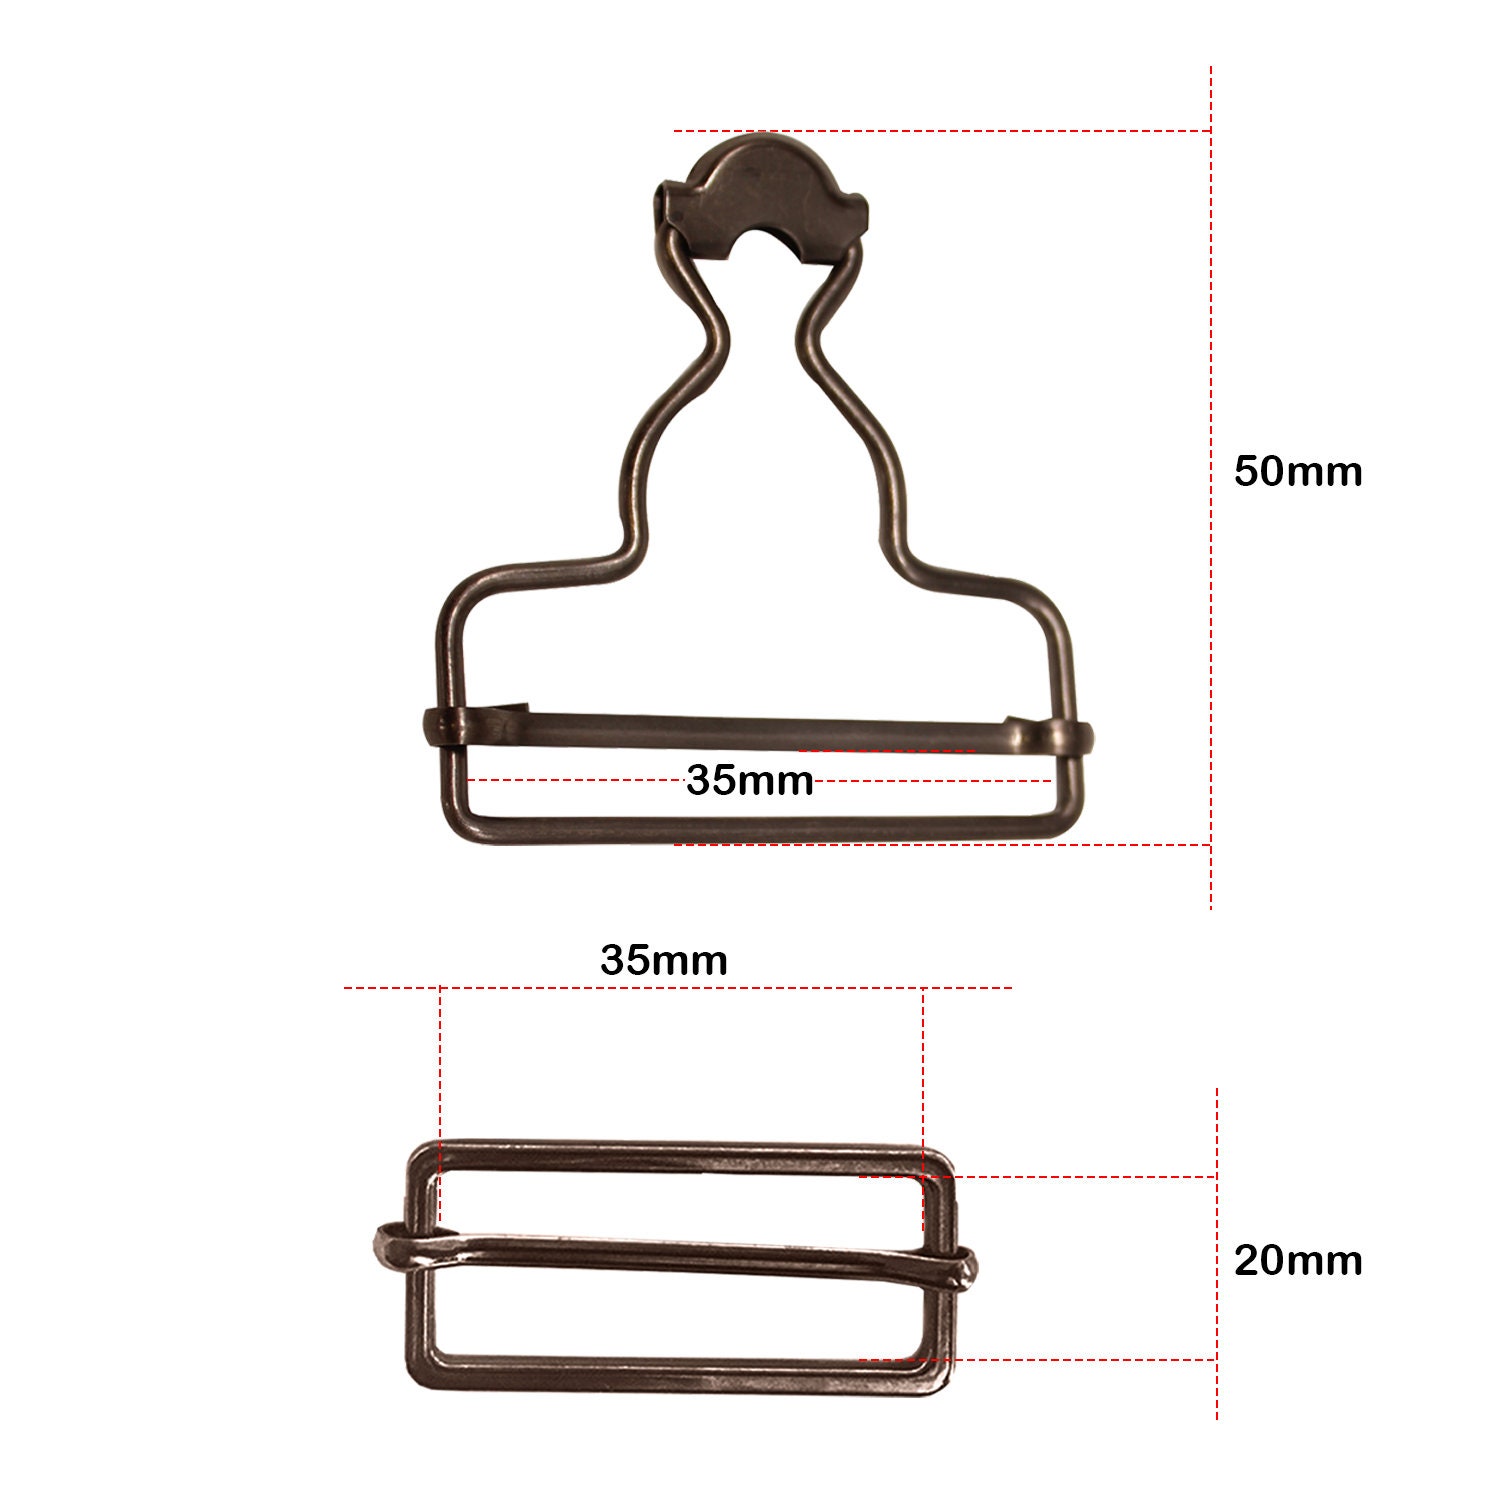 Dungaree Clips / Overalls Buckle With Adjustable Triglides Slider Roller  Pin Buckles and Button for Belt Bags DIY Accessories 